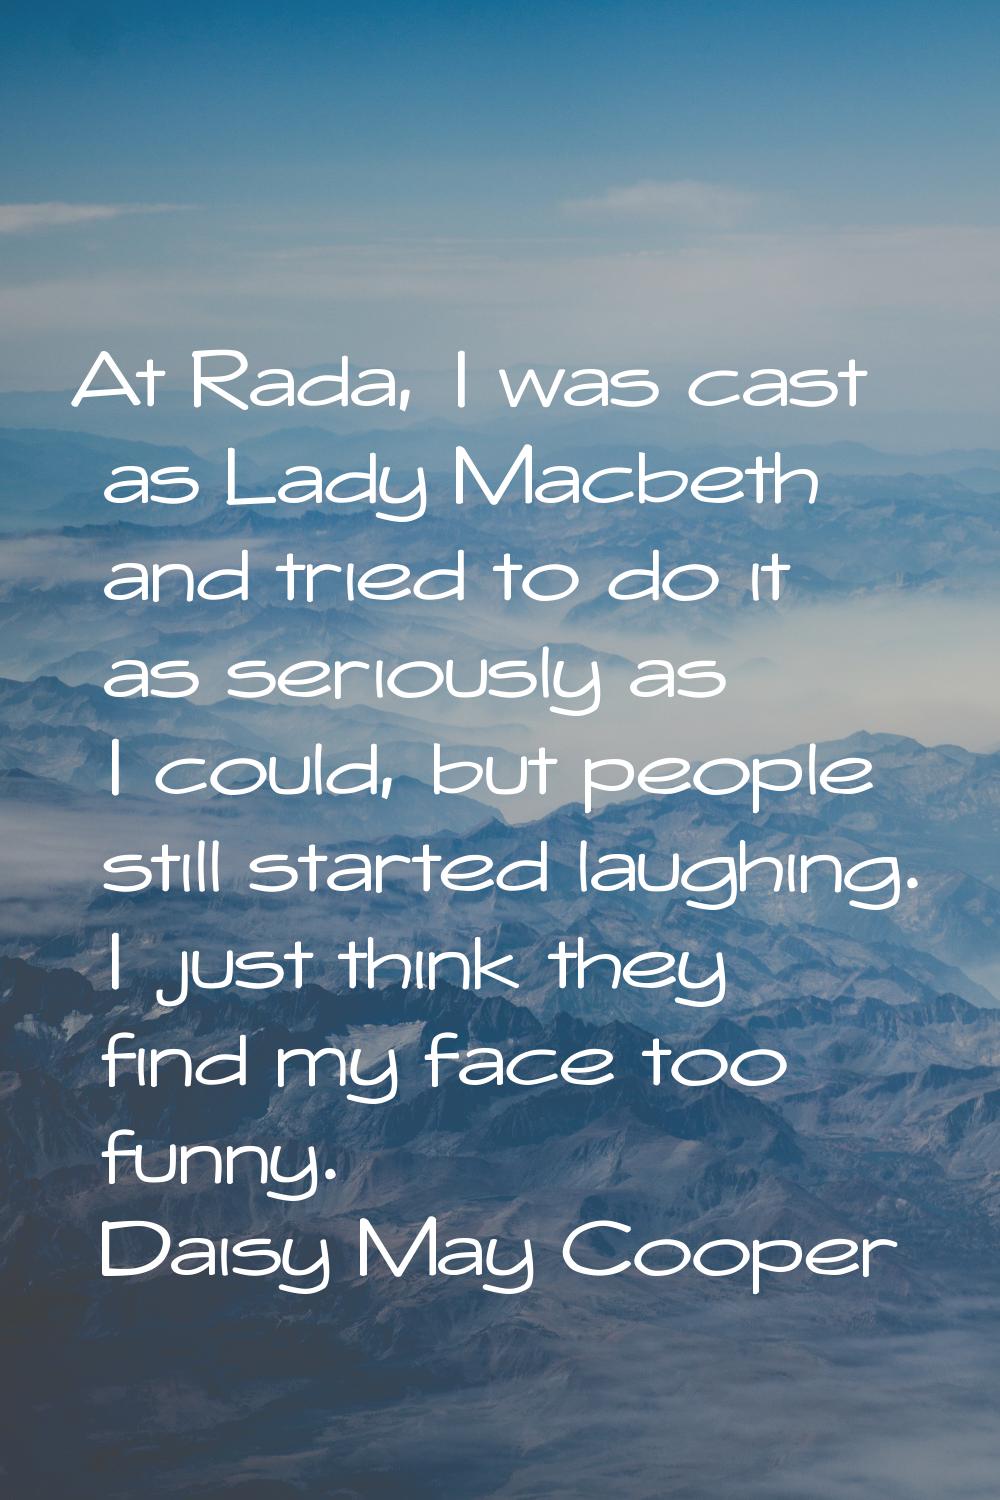 At Rada, I was cast as Lady Macbeth and tried to do it as seriously as I could, but people still st